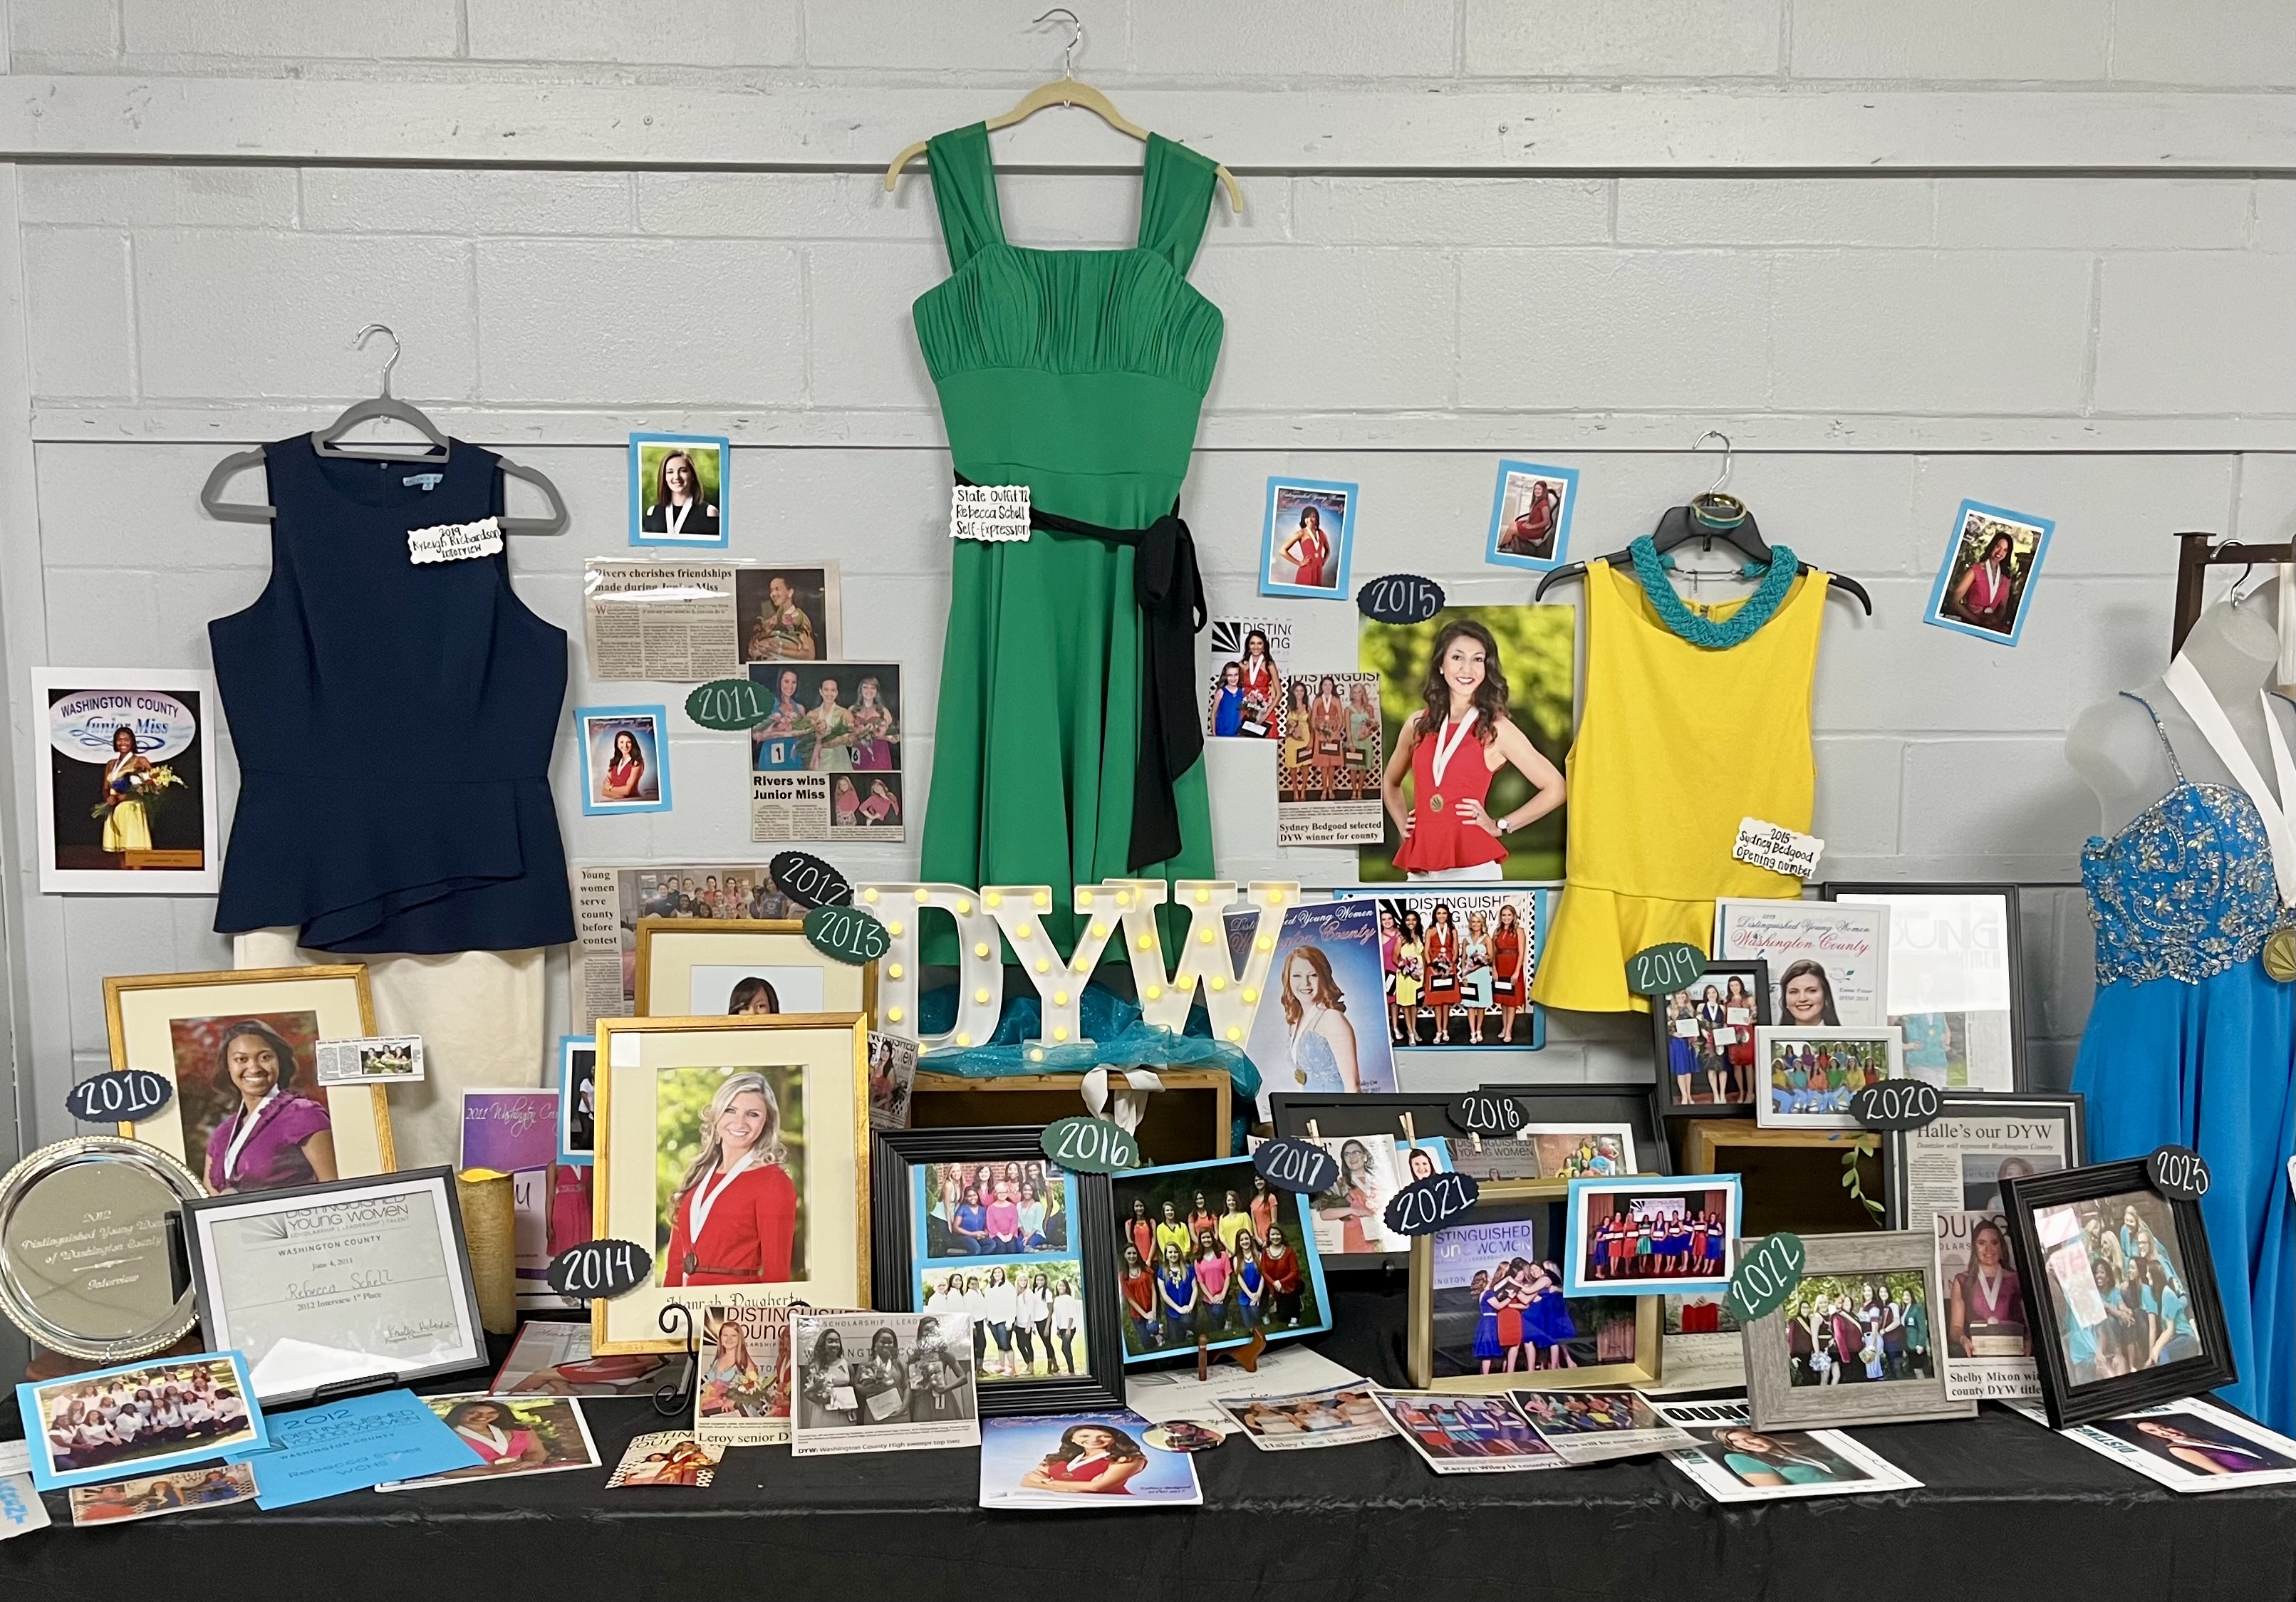 A colorful display of programs, pictures, and attire adorn a celebratory table